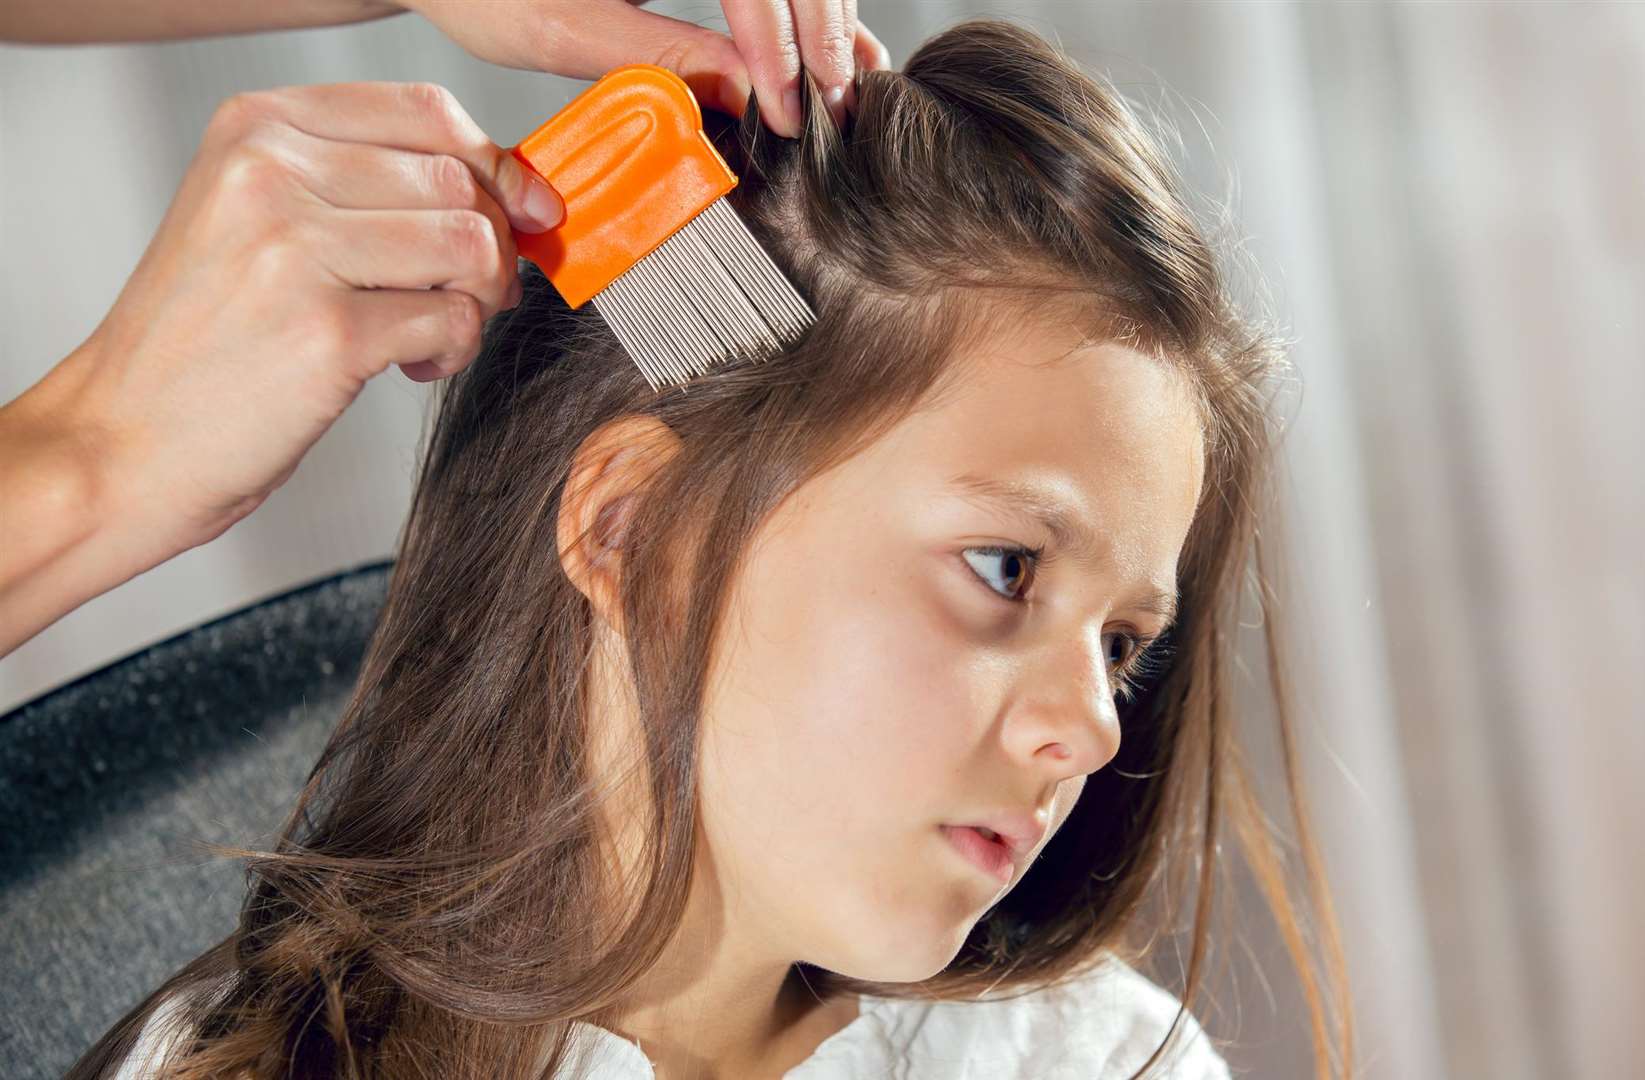 When was the last time you checked for head lice?